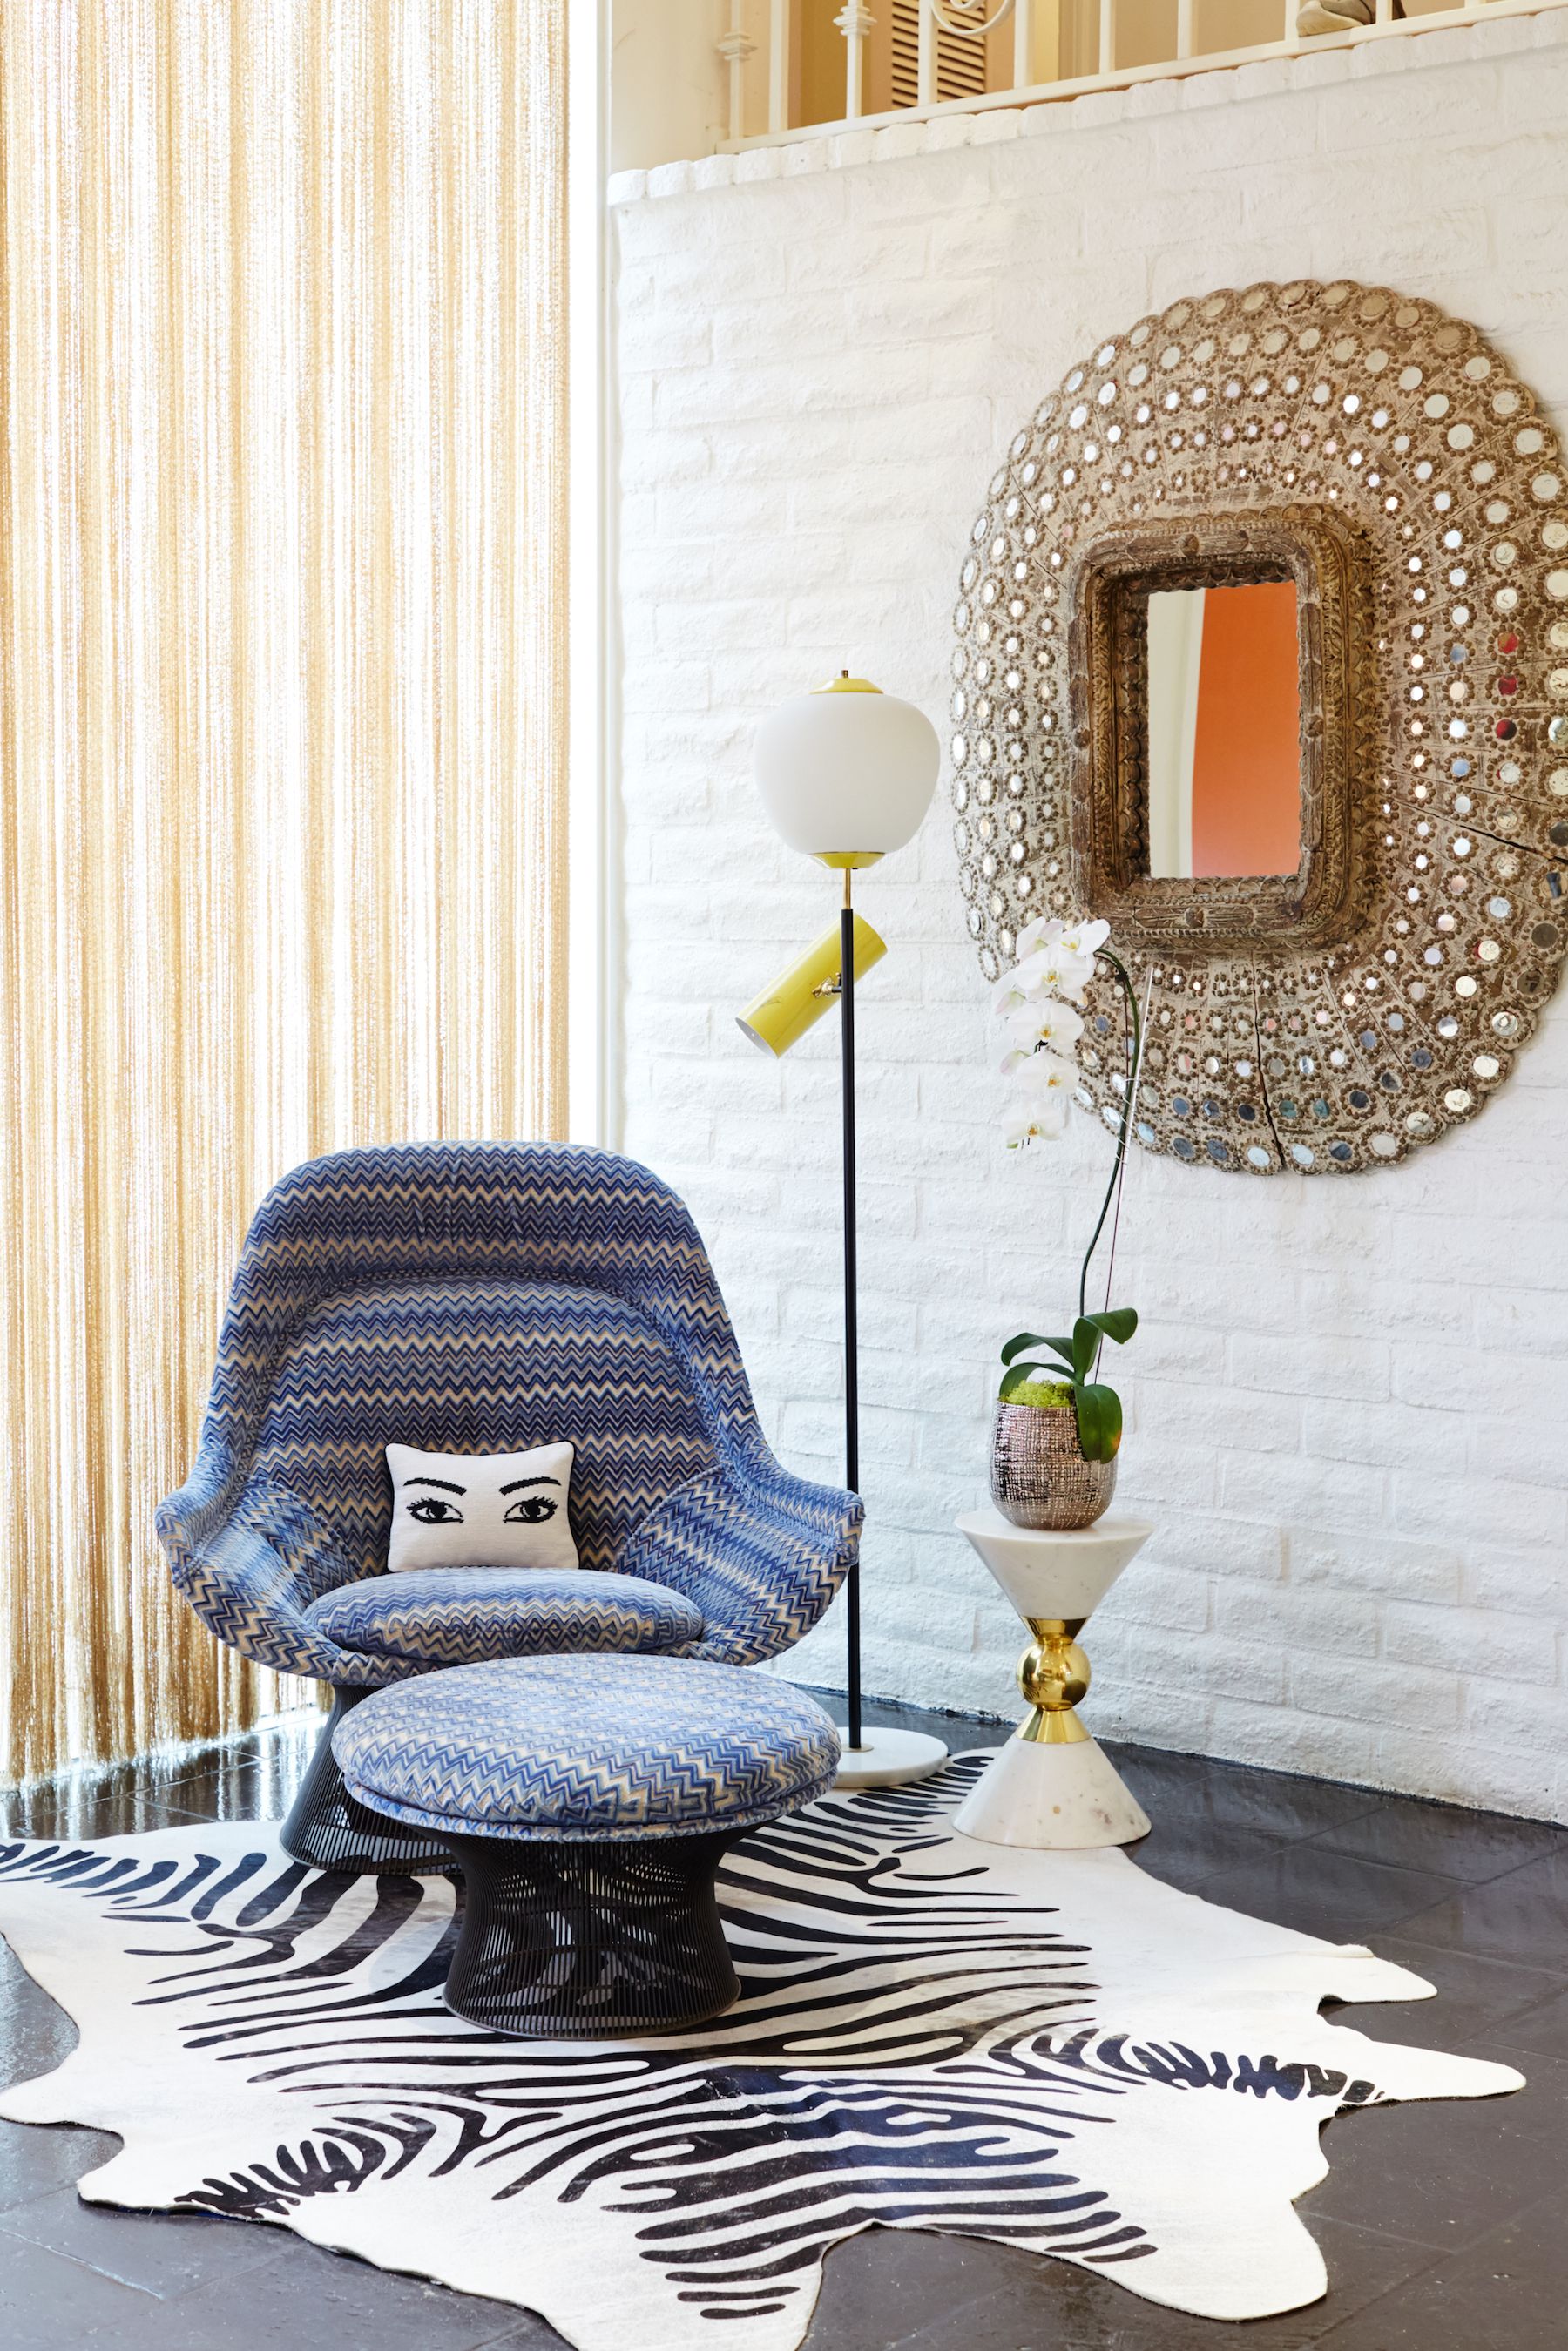 Heart of Clay - Interview with Jonathan Adler